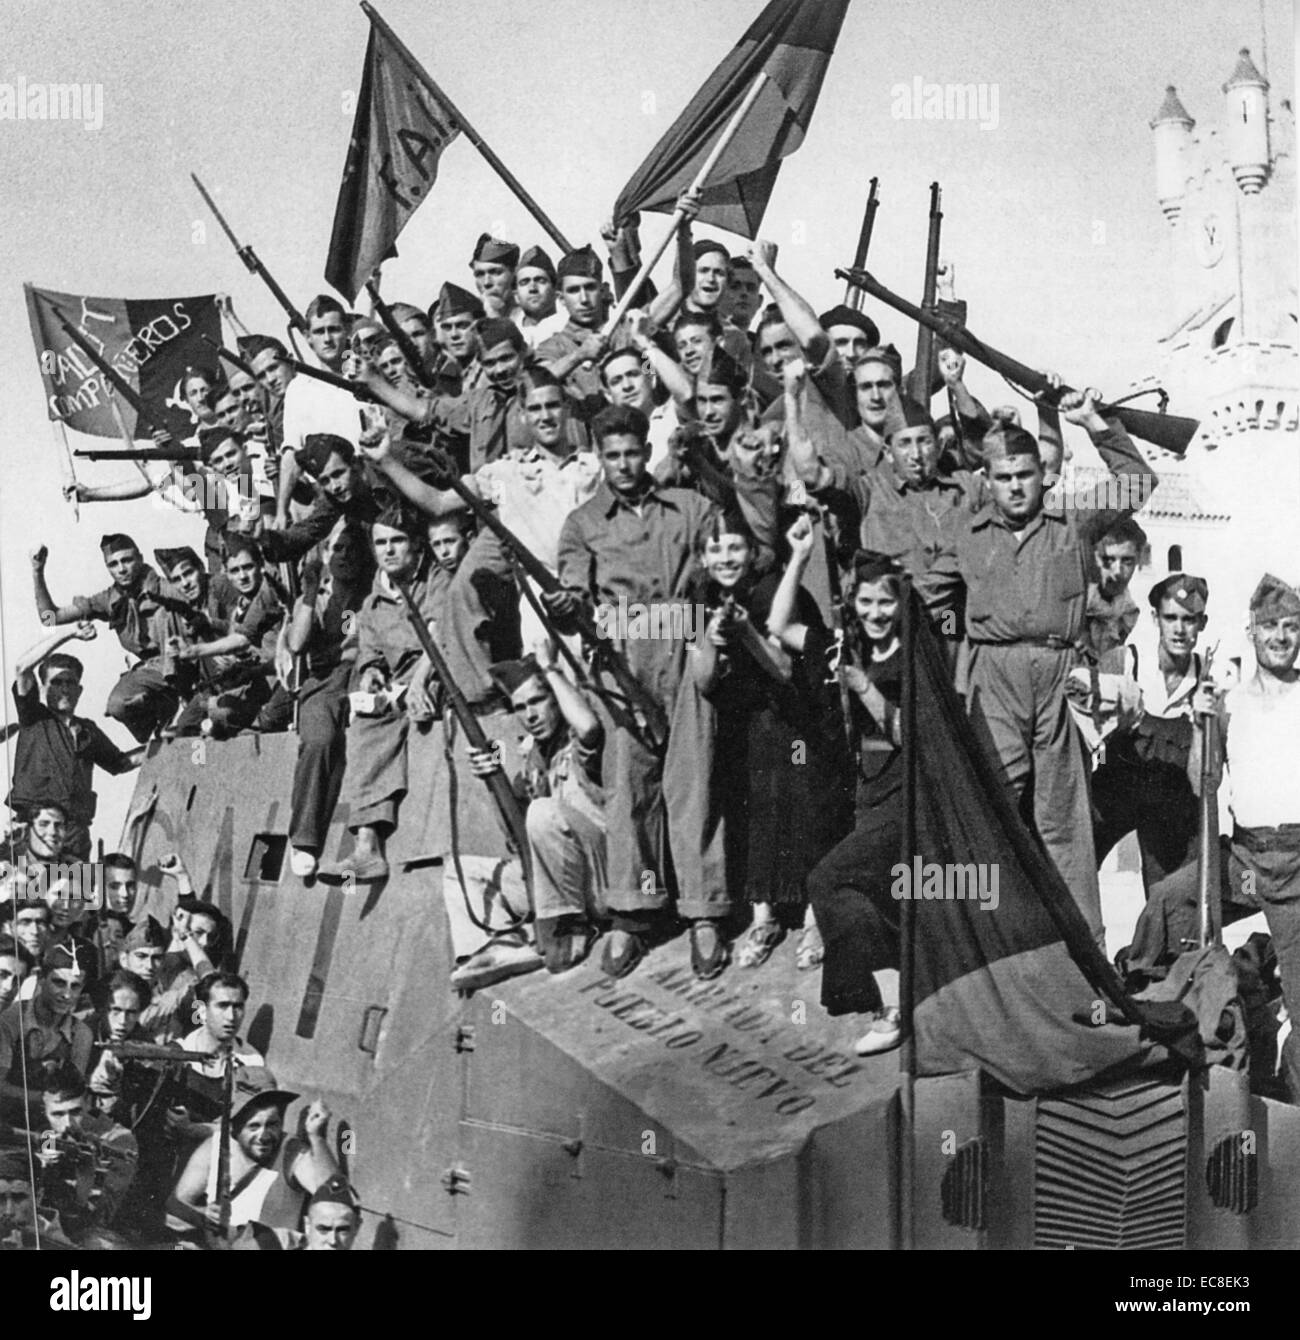 SPANISH CIVIL WAR (1936-1939) Anarchist fighters from the National Confederation of Labour in Barcelona in July 1936 Stock Photo